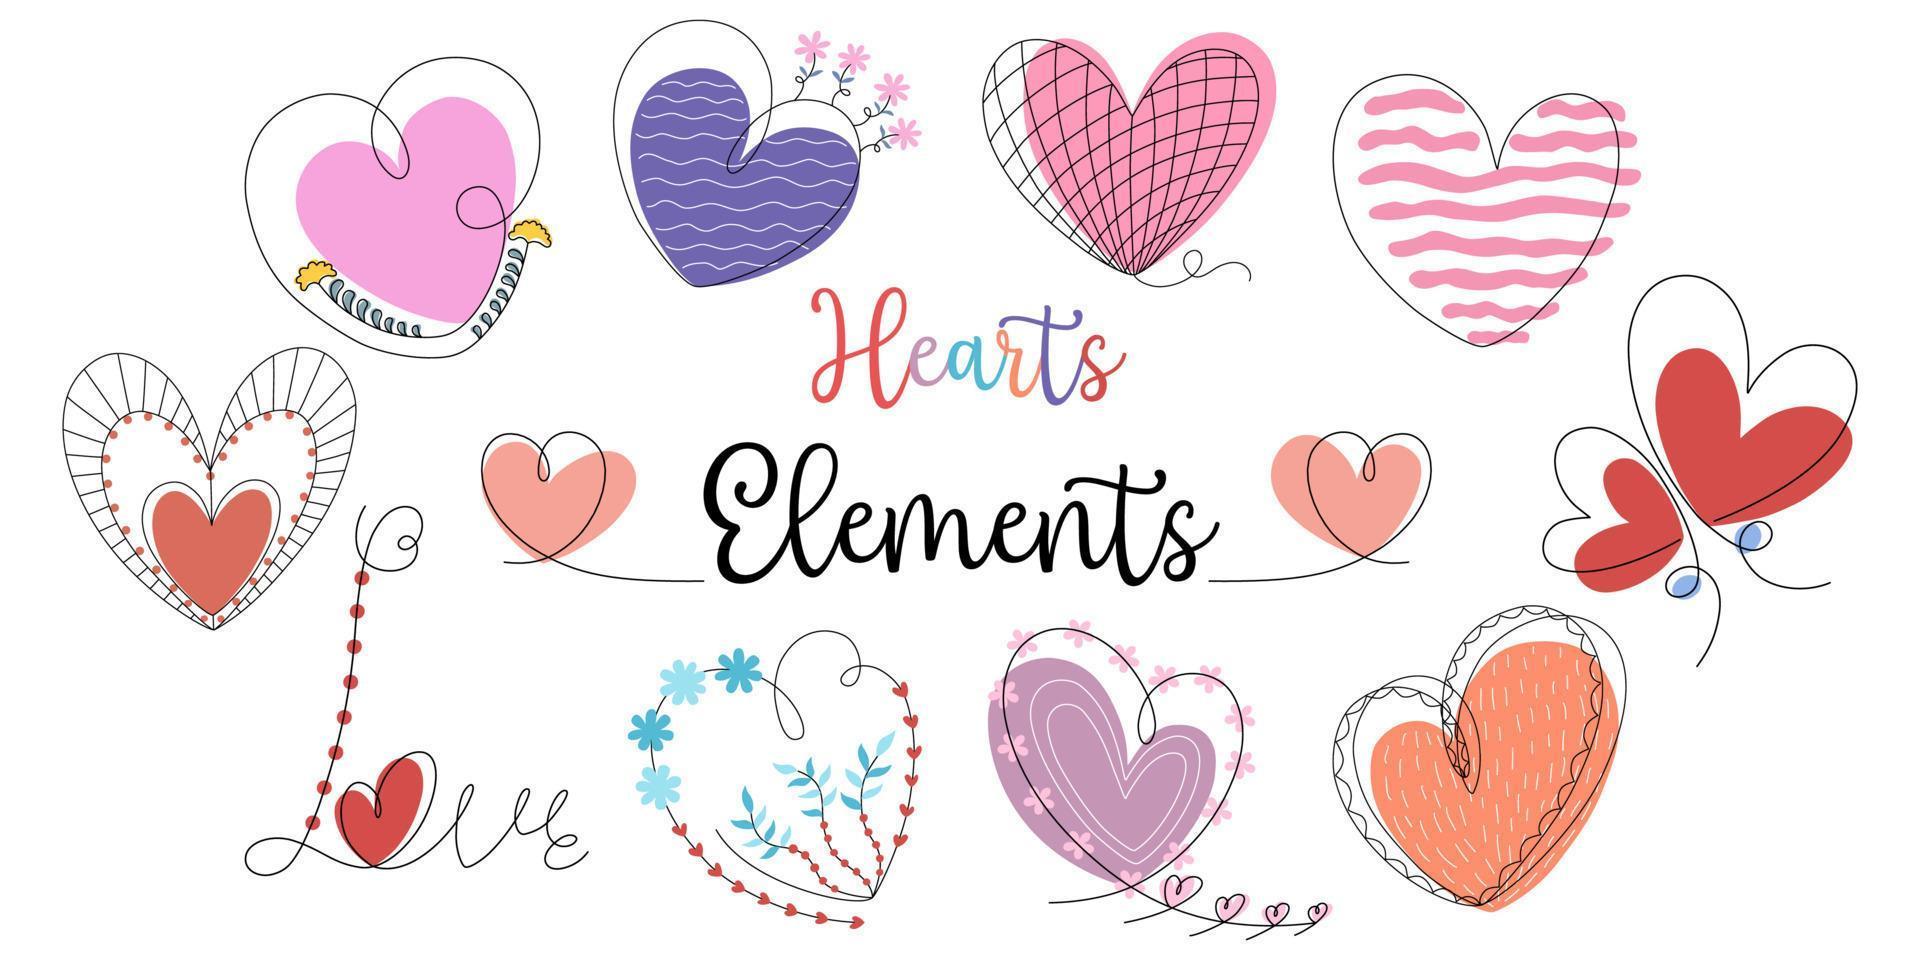 Hearts shaped elements vector set Designed in doodle style for decoration, sticker, digital printing, card design, Valentine's Day, gift and more.